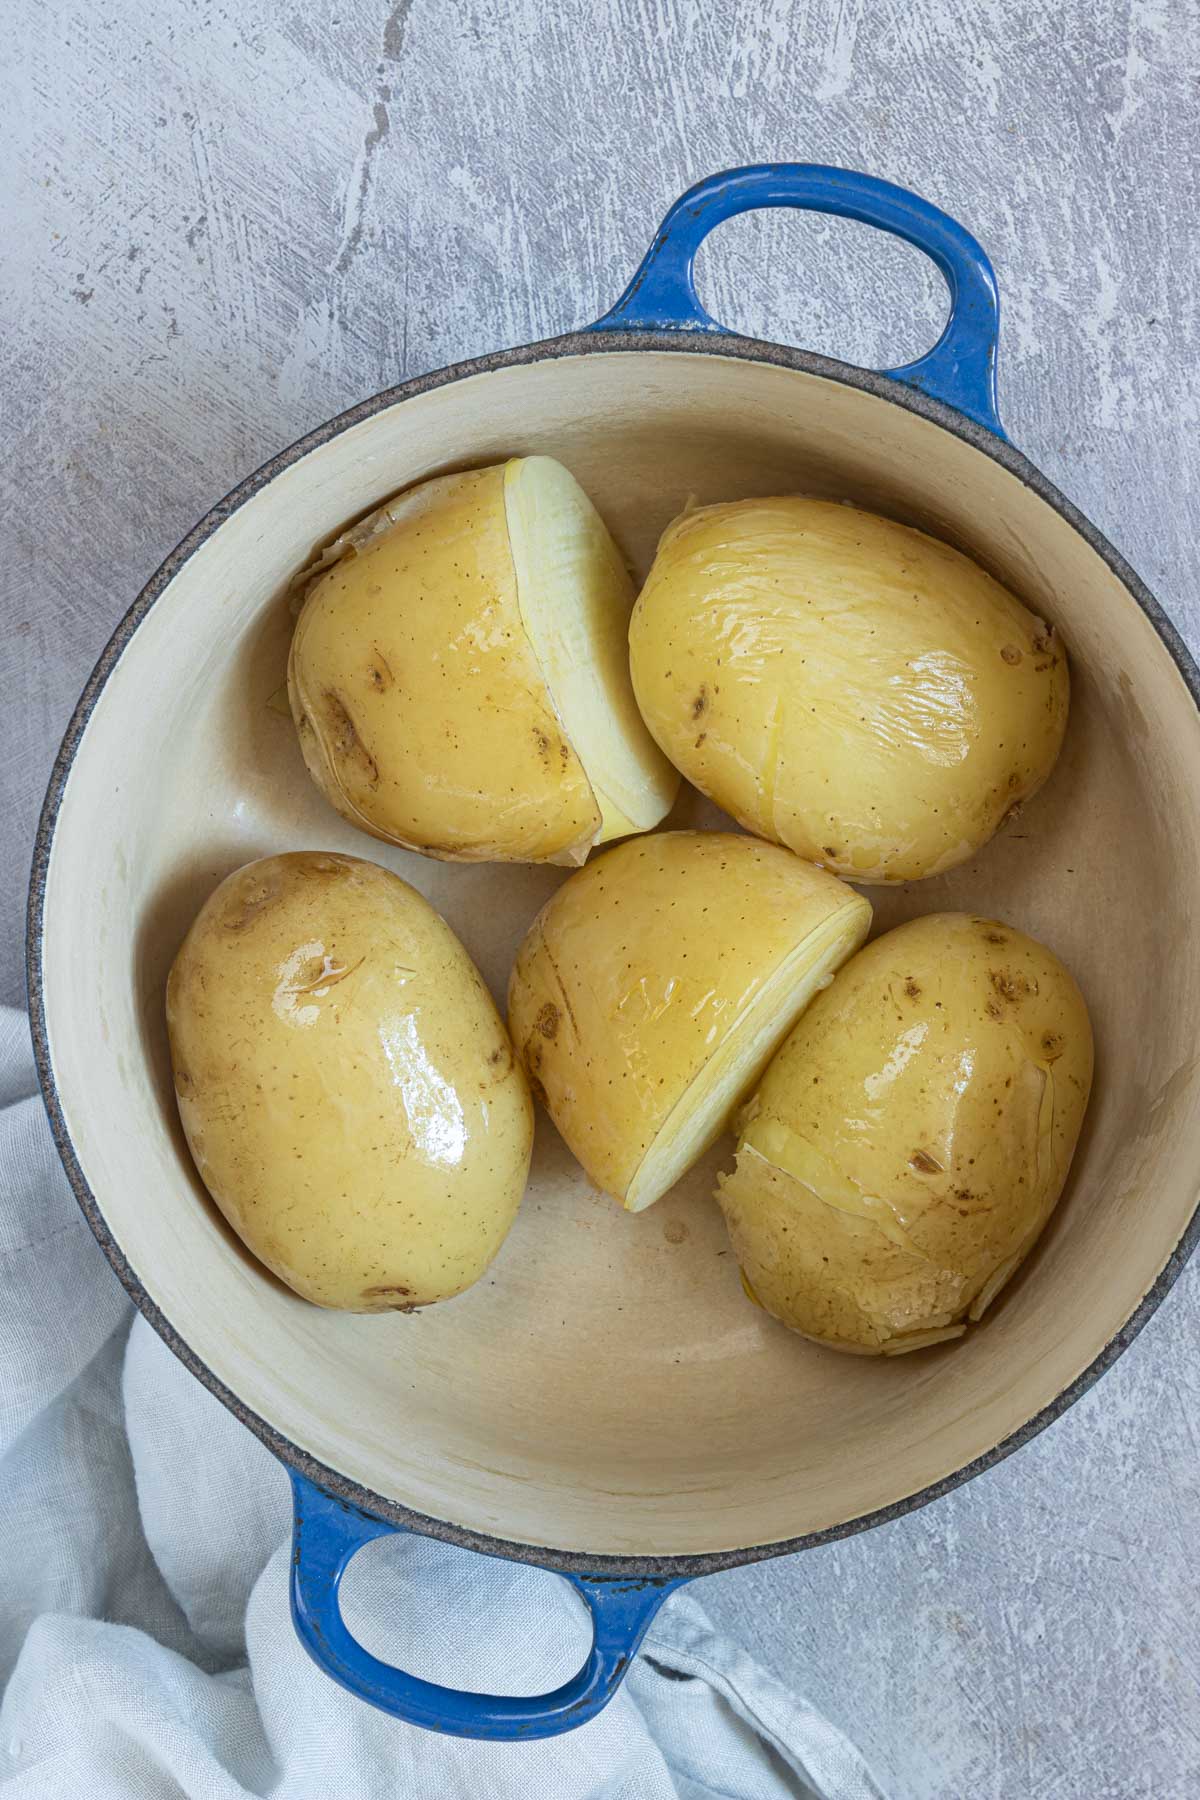 How To Store Cooked Potatoes For Potato Salad